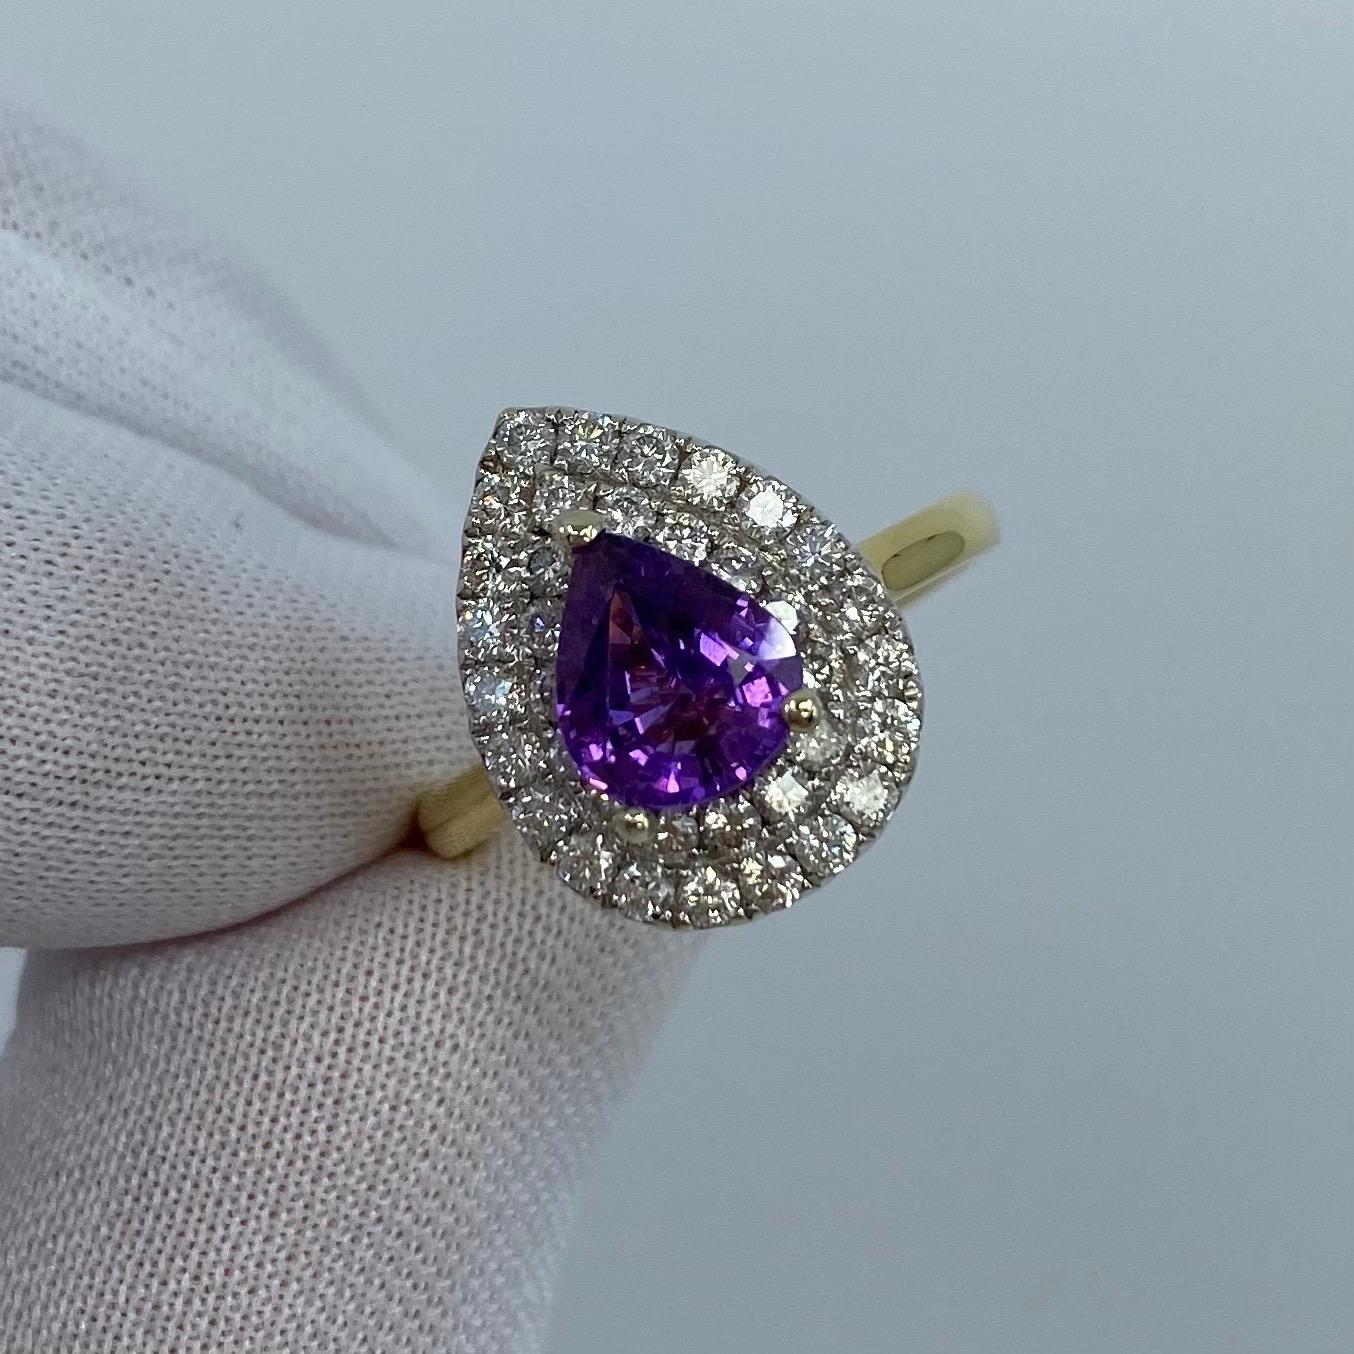 Purple Sapphire & Diamond 18K Yellow & White Gold Ring

2.00 Carat fine deep purple pear cut sapphires centre stone. Surrounded by x40 1.5mm round brilliant cut diamonds (approx. 0.6 carat G/H colour Si1-2 clarity) in a beautiful 18 Karat white and